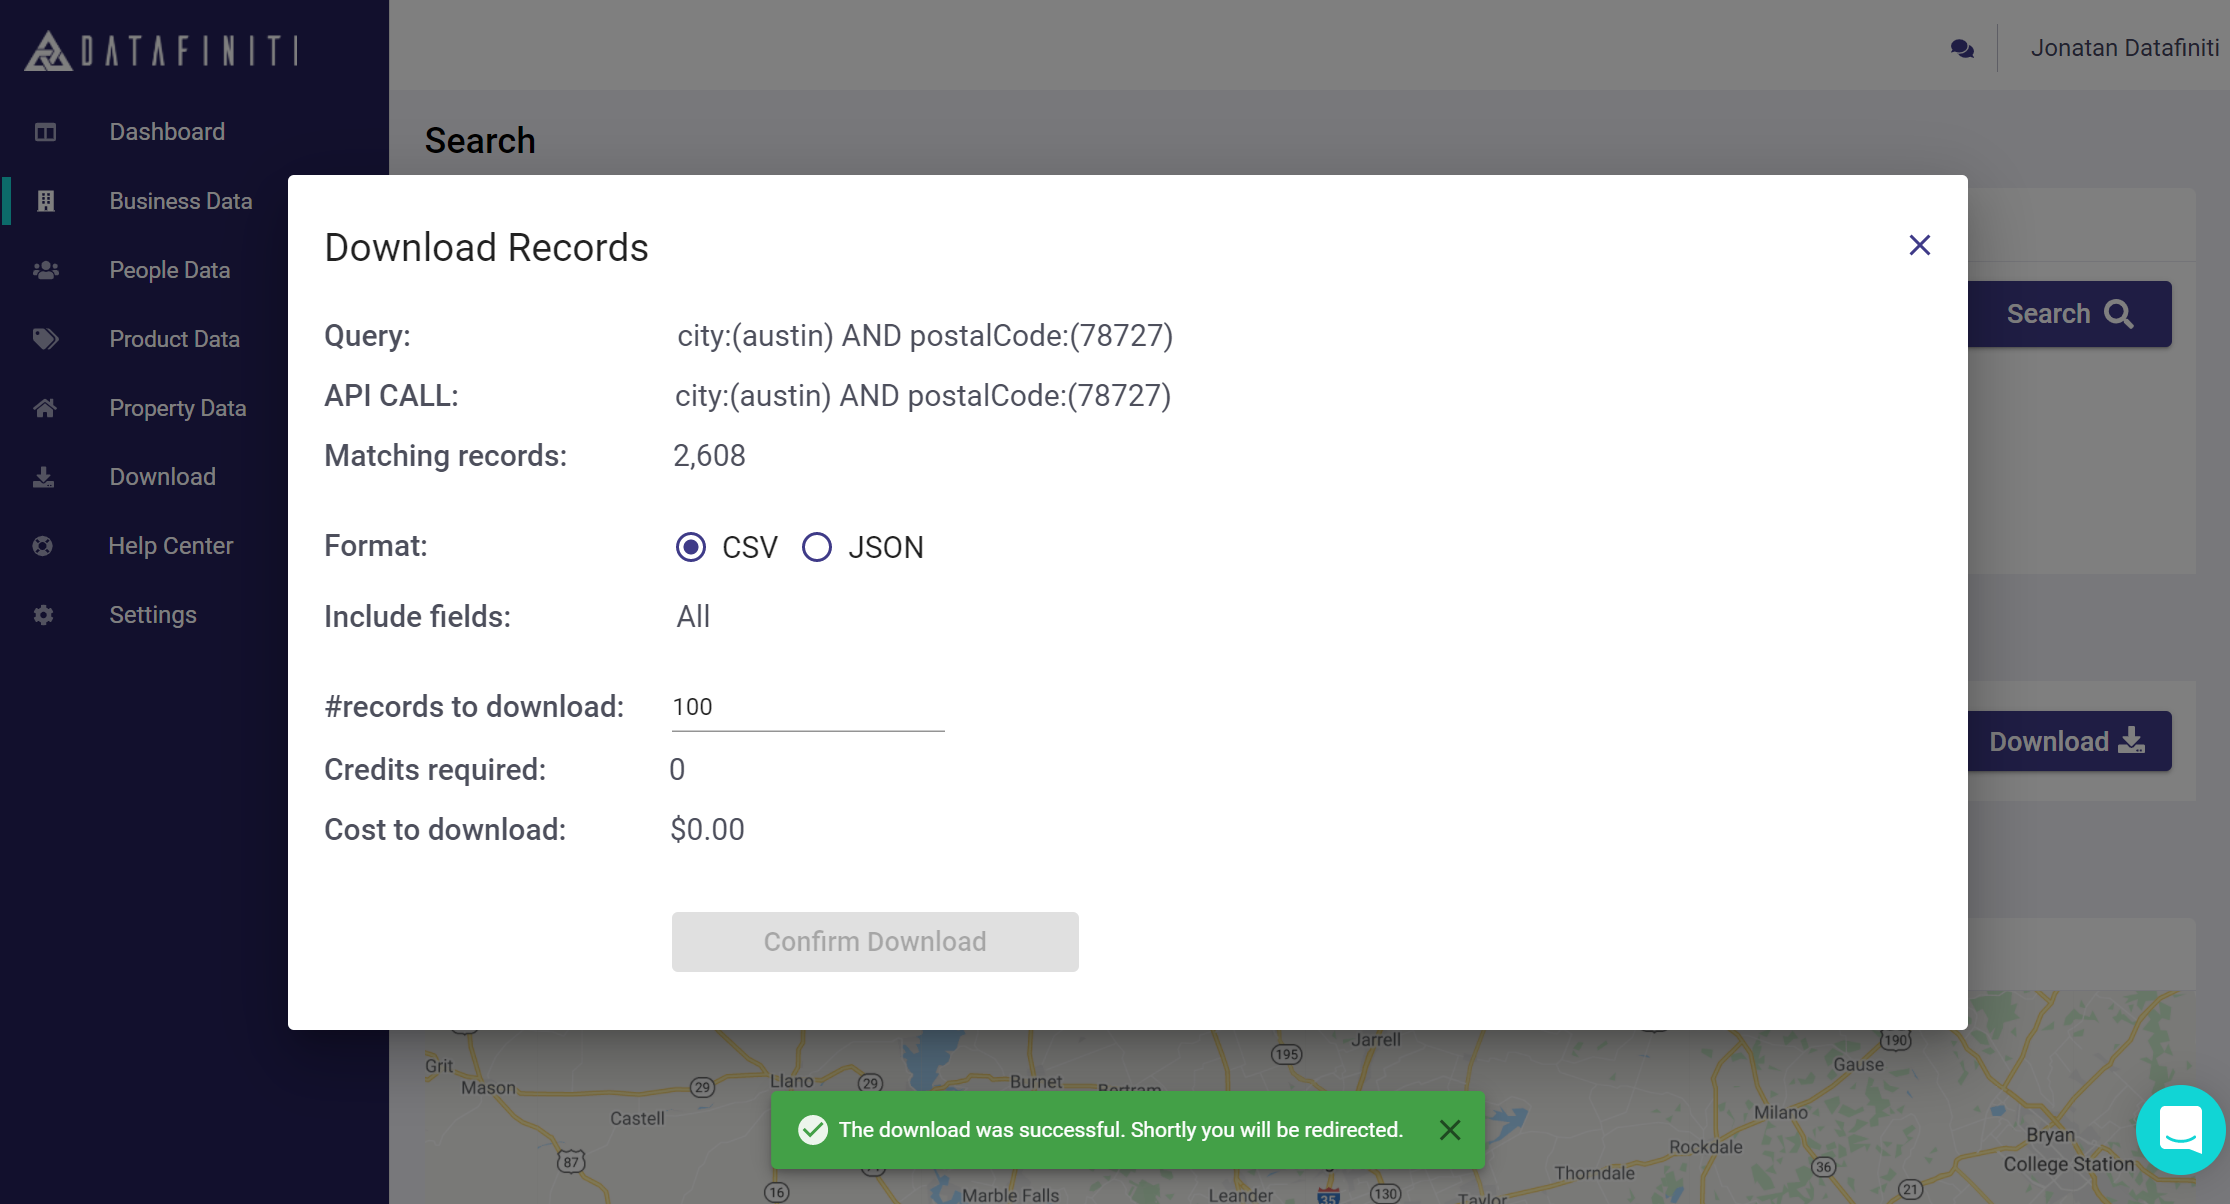 After you submit your download, you'll see the "Green box" prompt telling you that you will be redirected shortly to the downloaded results page.